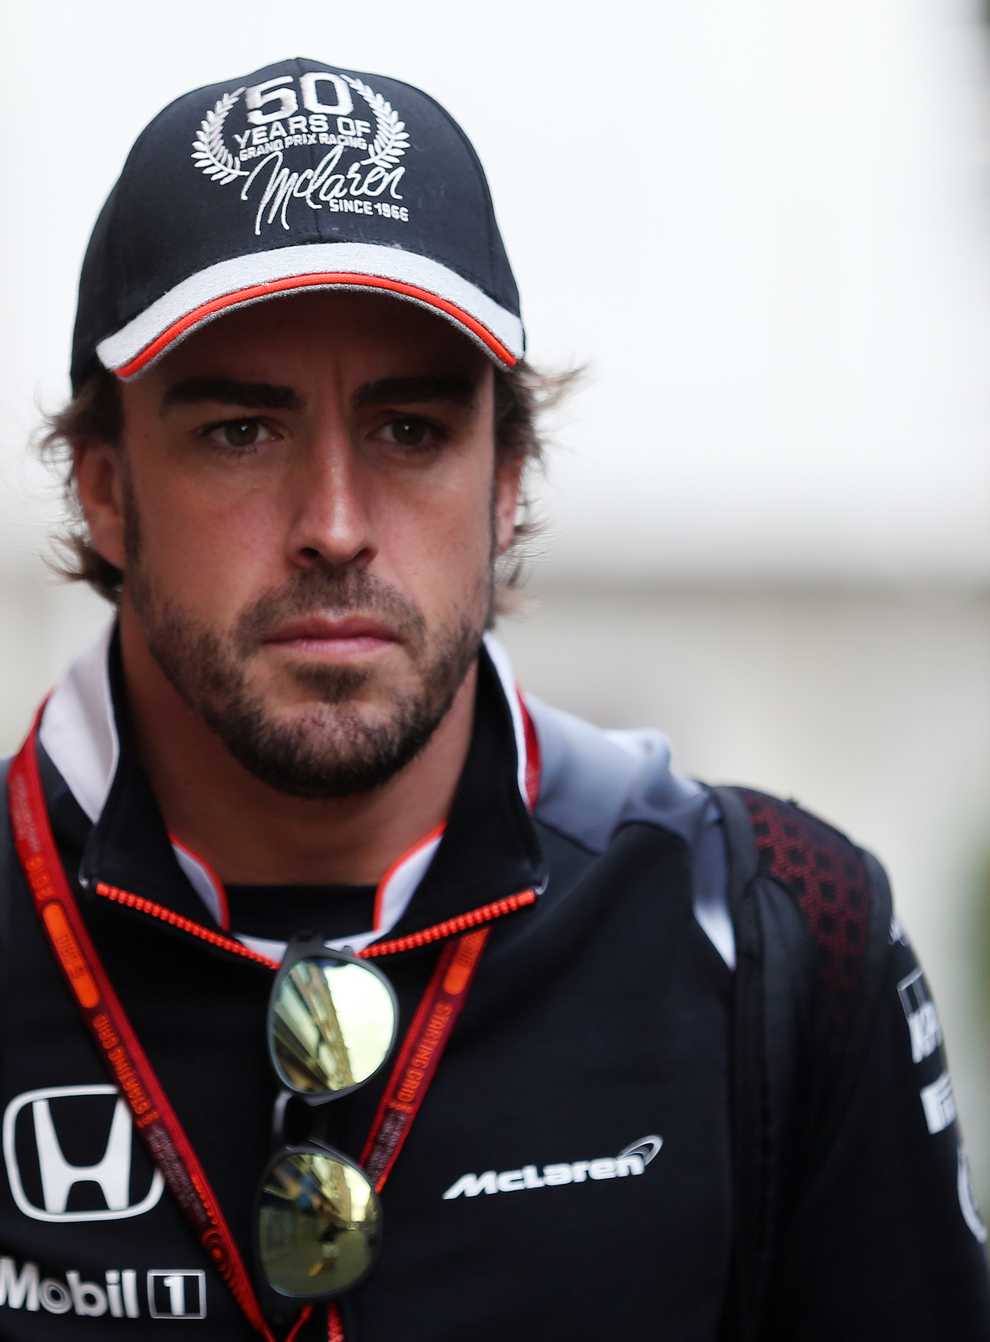 Fernando Alonso has been involved in a cycling accident